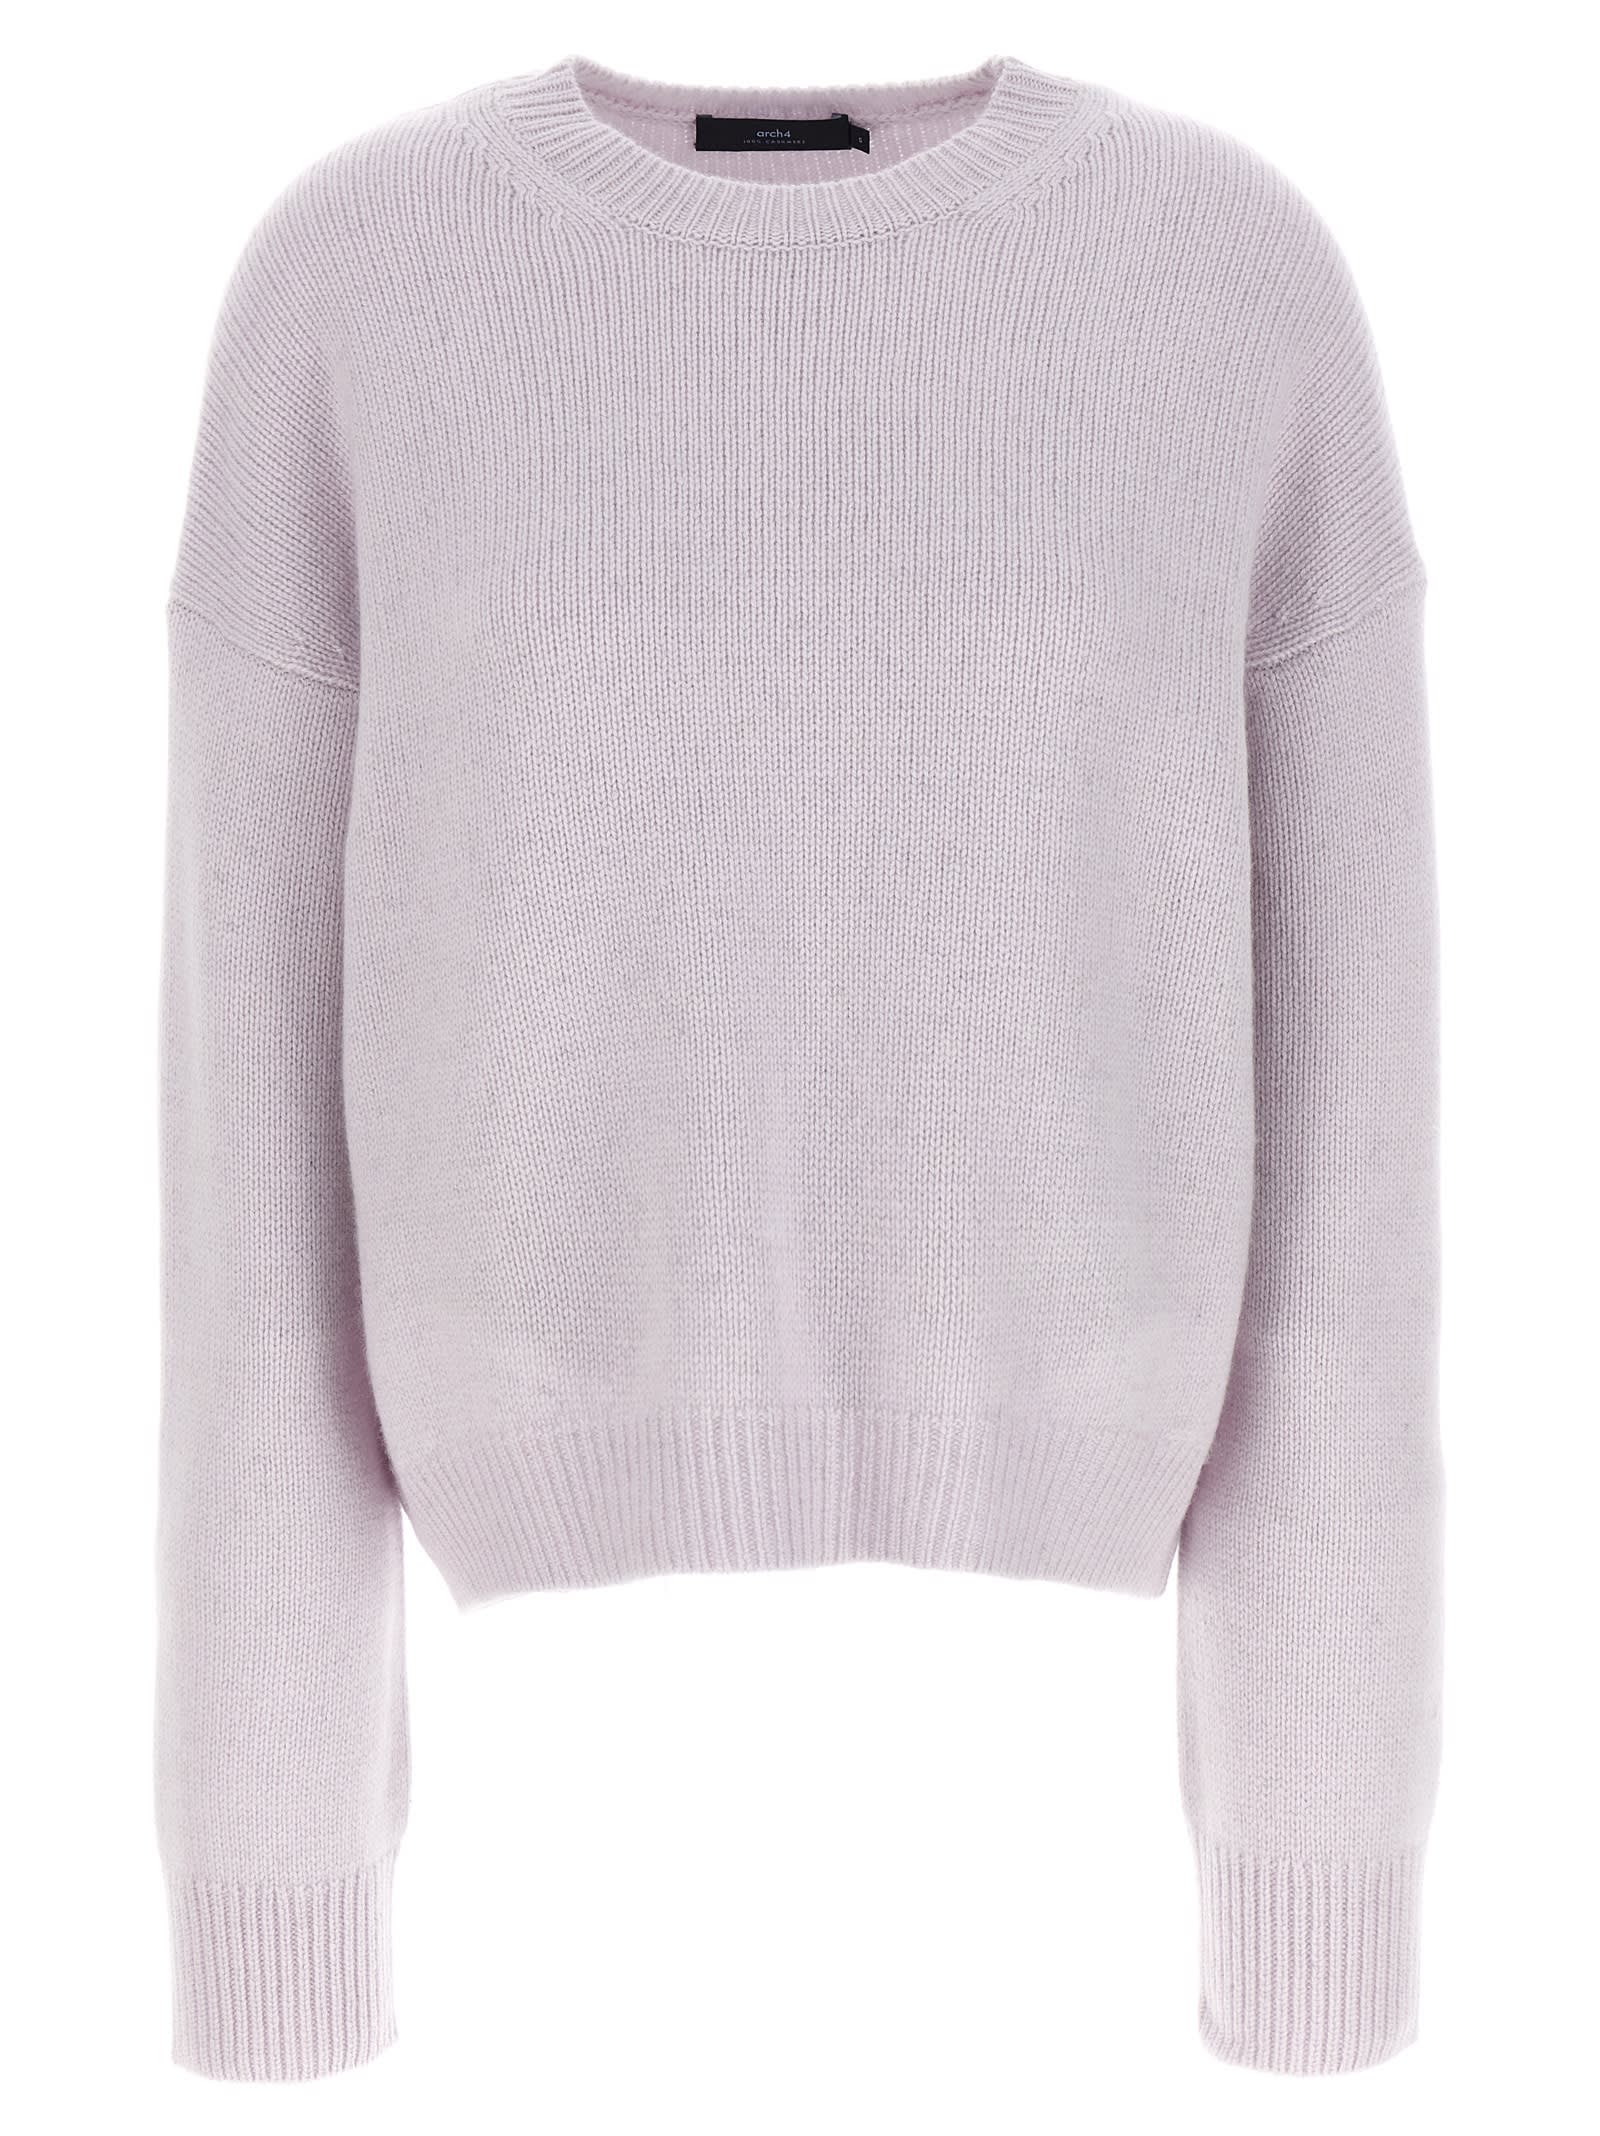 the Ivy Sweater